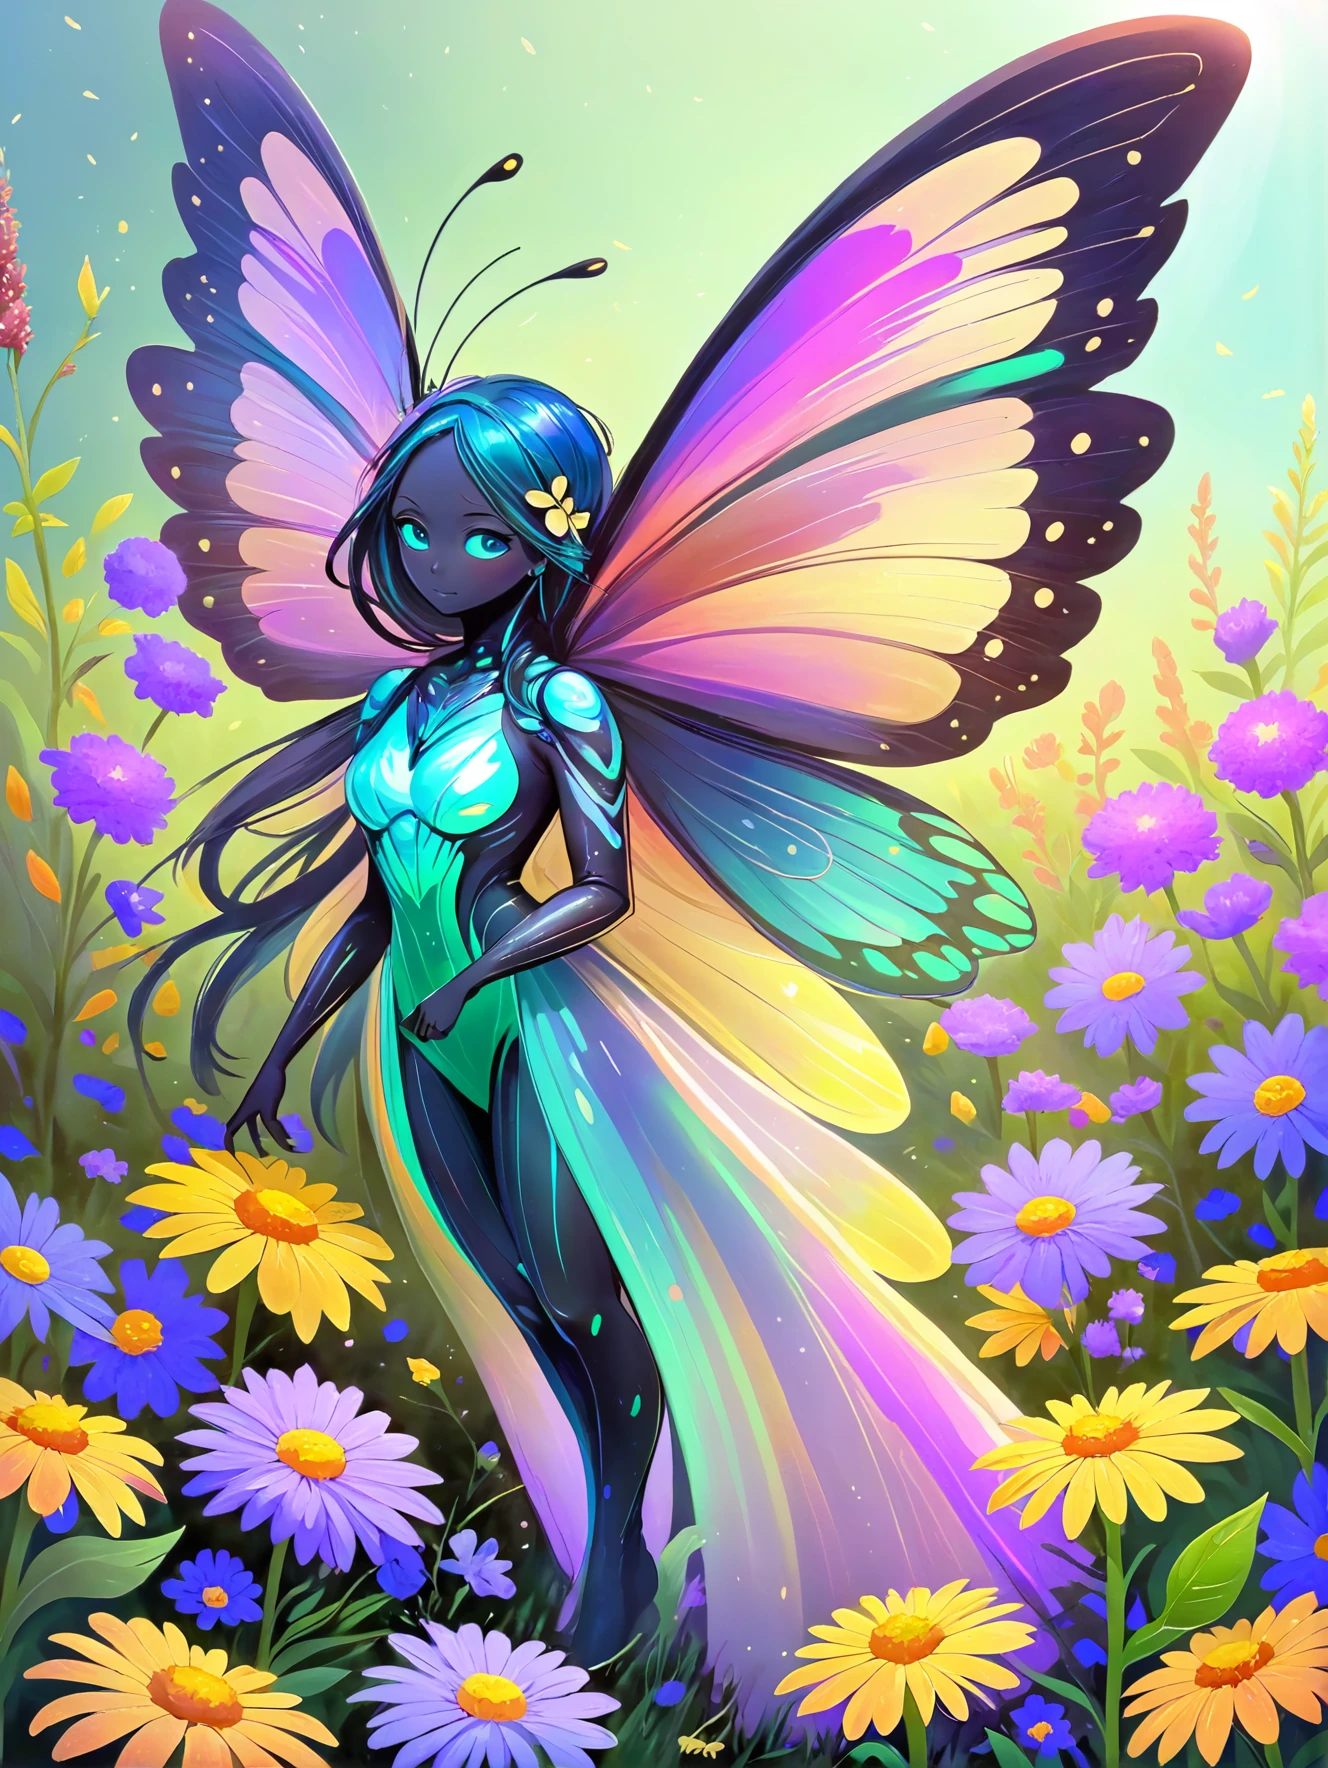 A vibrant butterfly spirit, with iridescent wings, fluttering among a field of wildflowers.